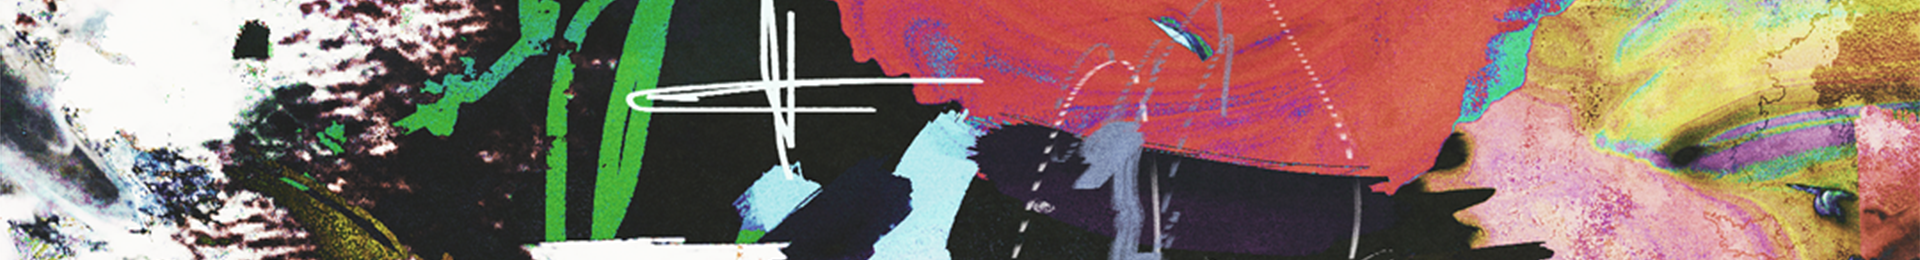 moreabstrACT. banner